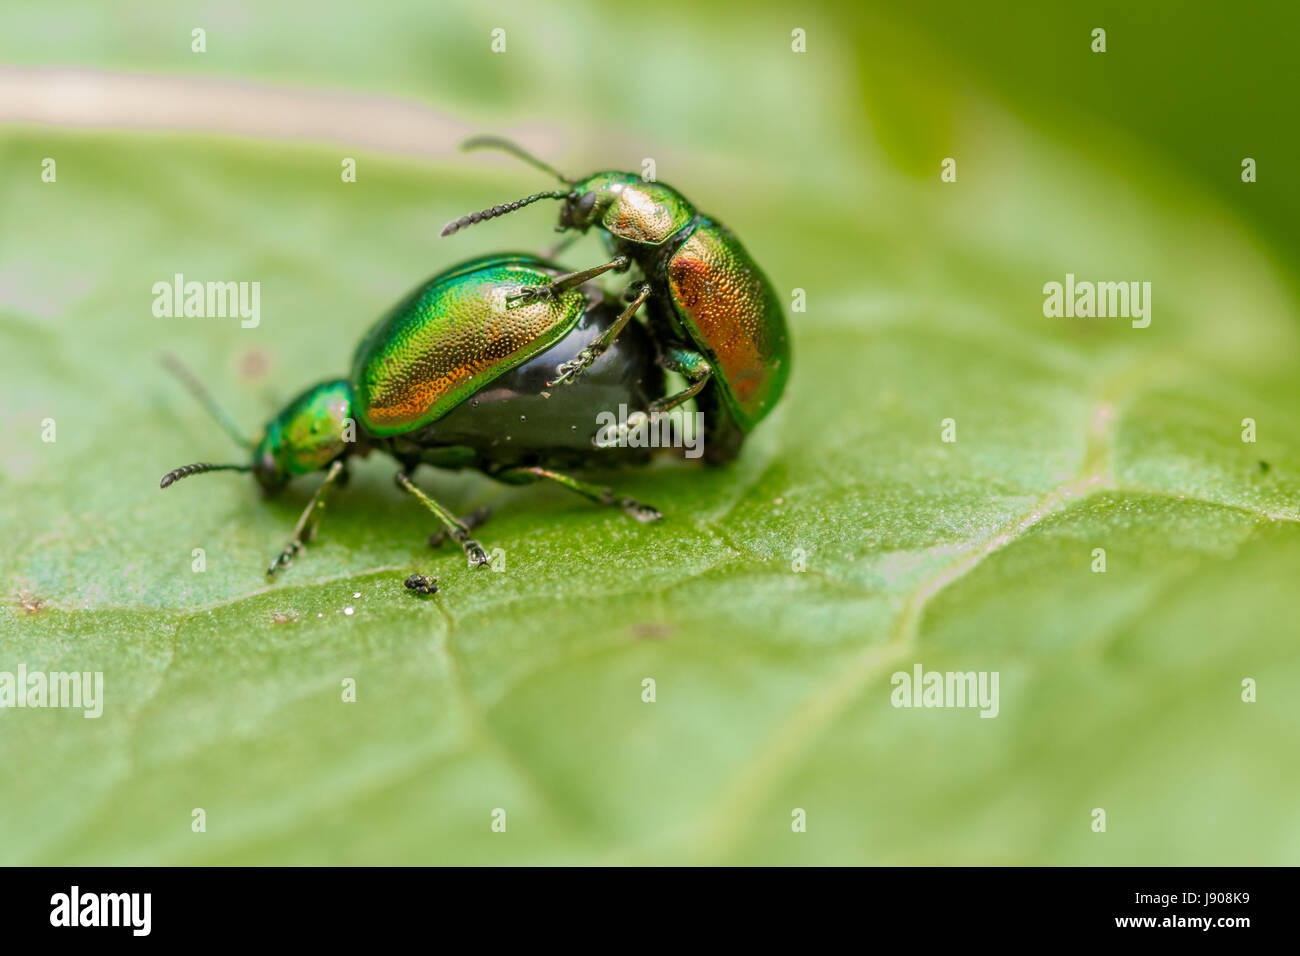 Le tansy beetle (Chrysolina graminis) Banque D'Images